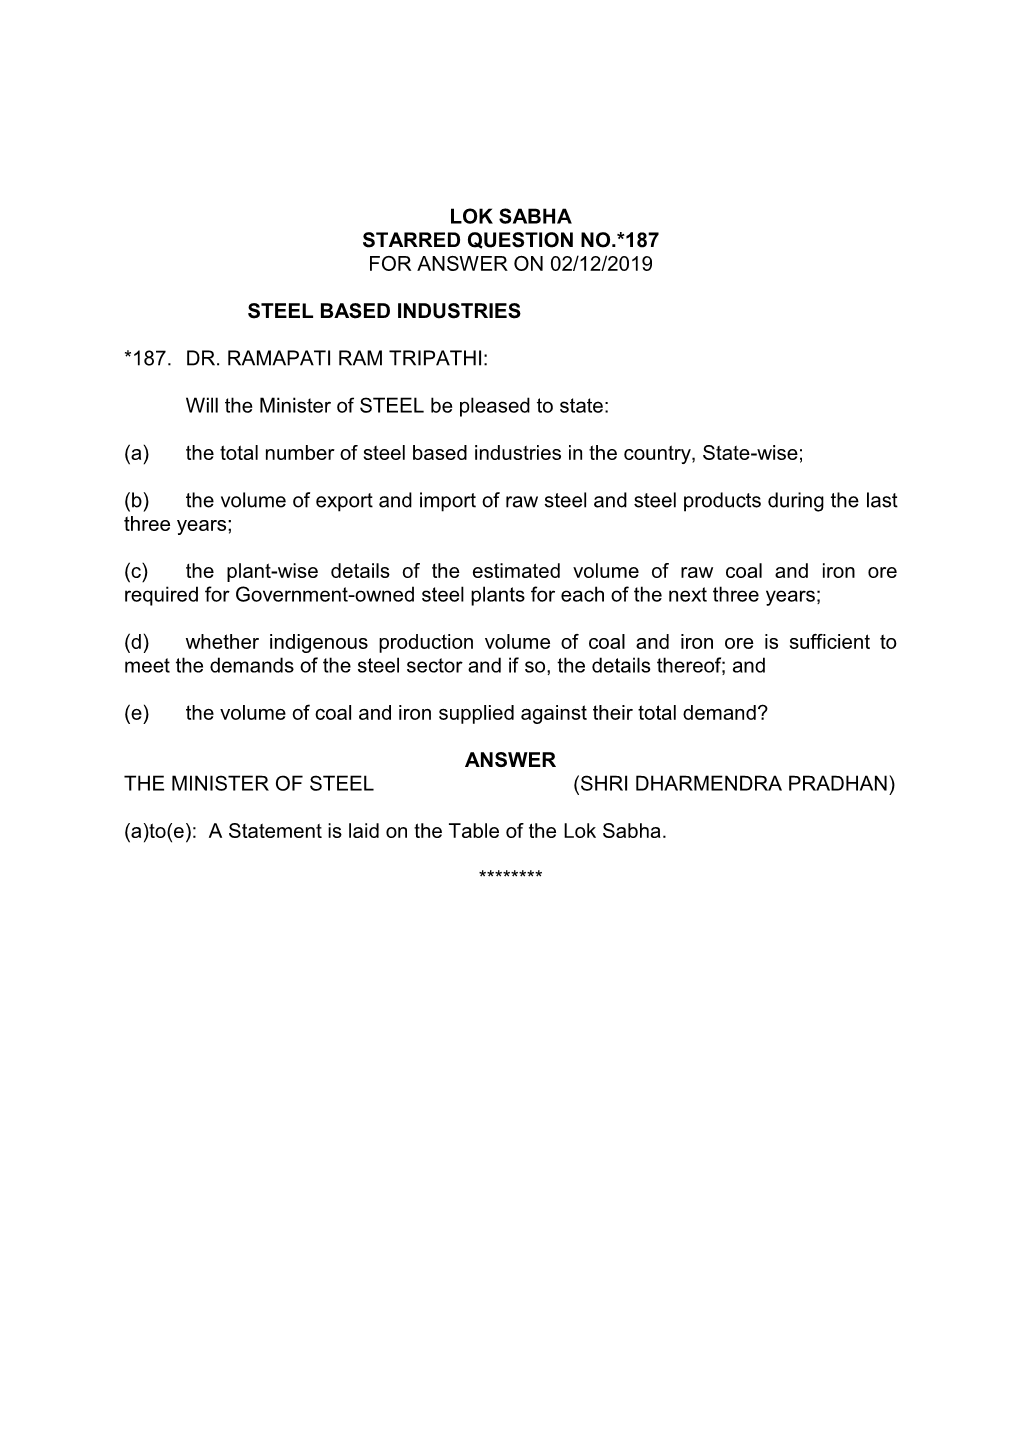 Lok Sabha Starred Question No.*187 for Answer on 02/12/2019